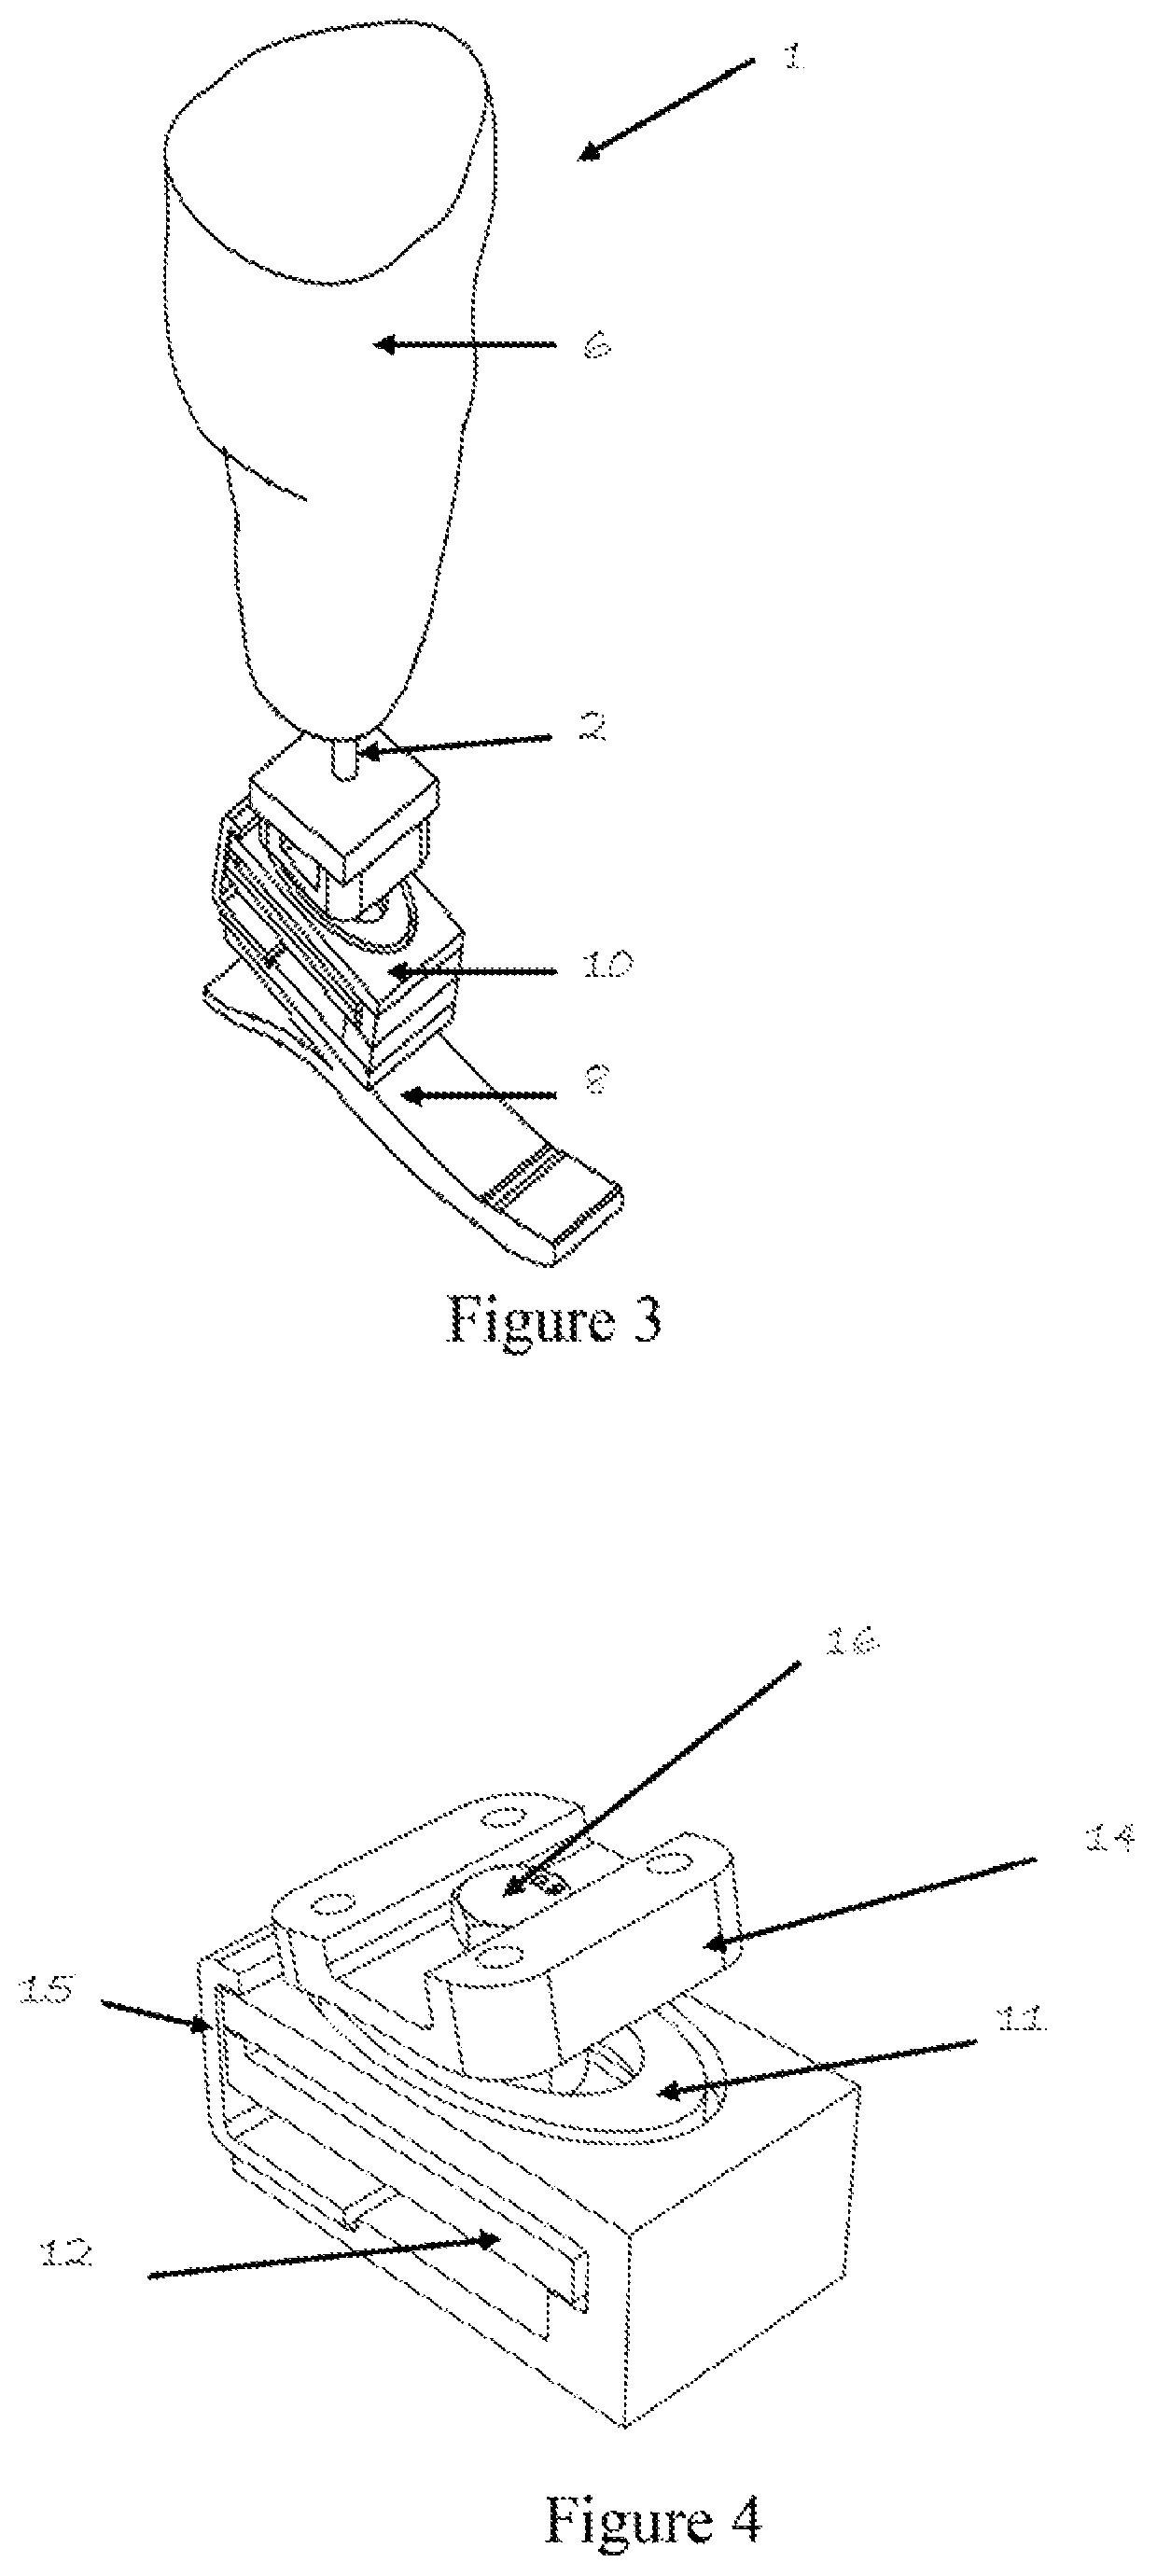 Adapter for self-alignment in 3 dimensional planes for passive prosthetics